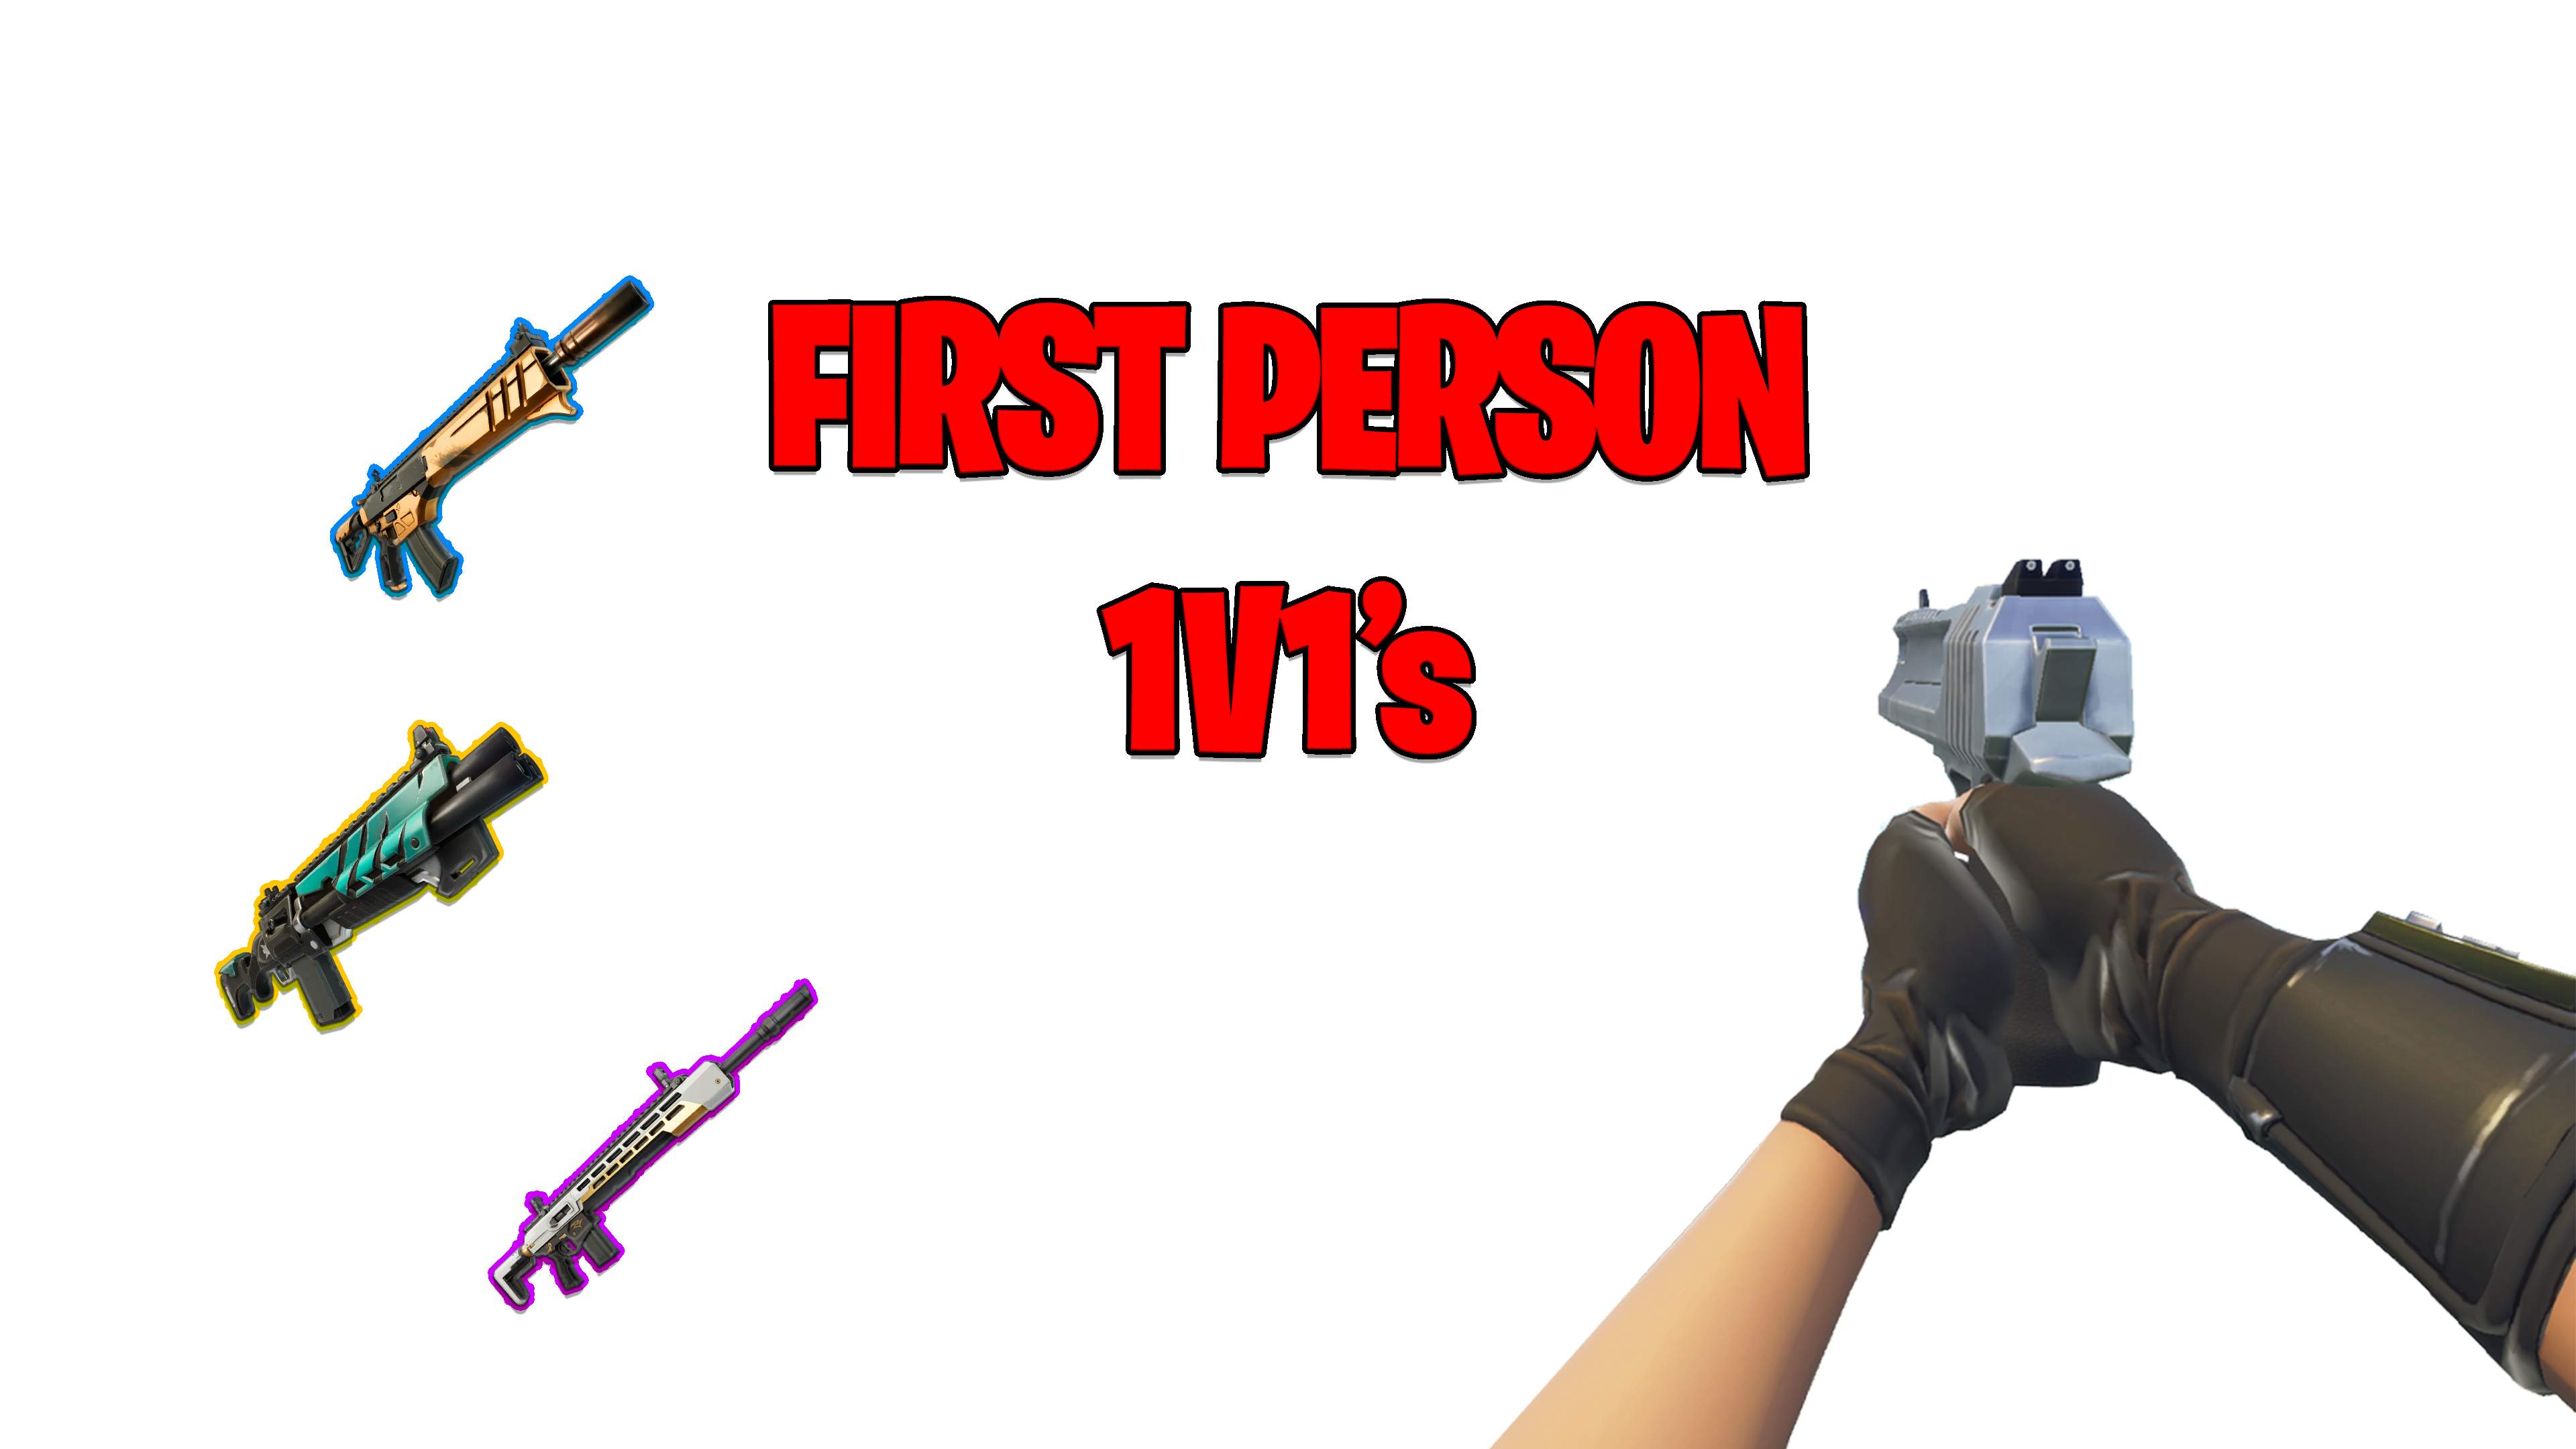 FIRST PERSON 1v1